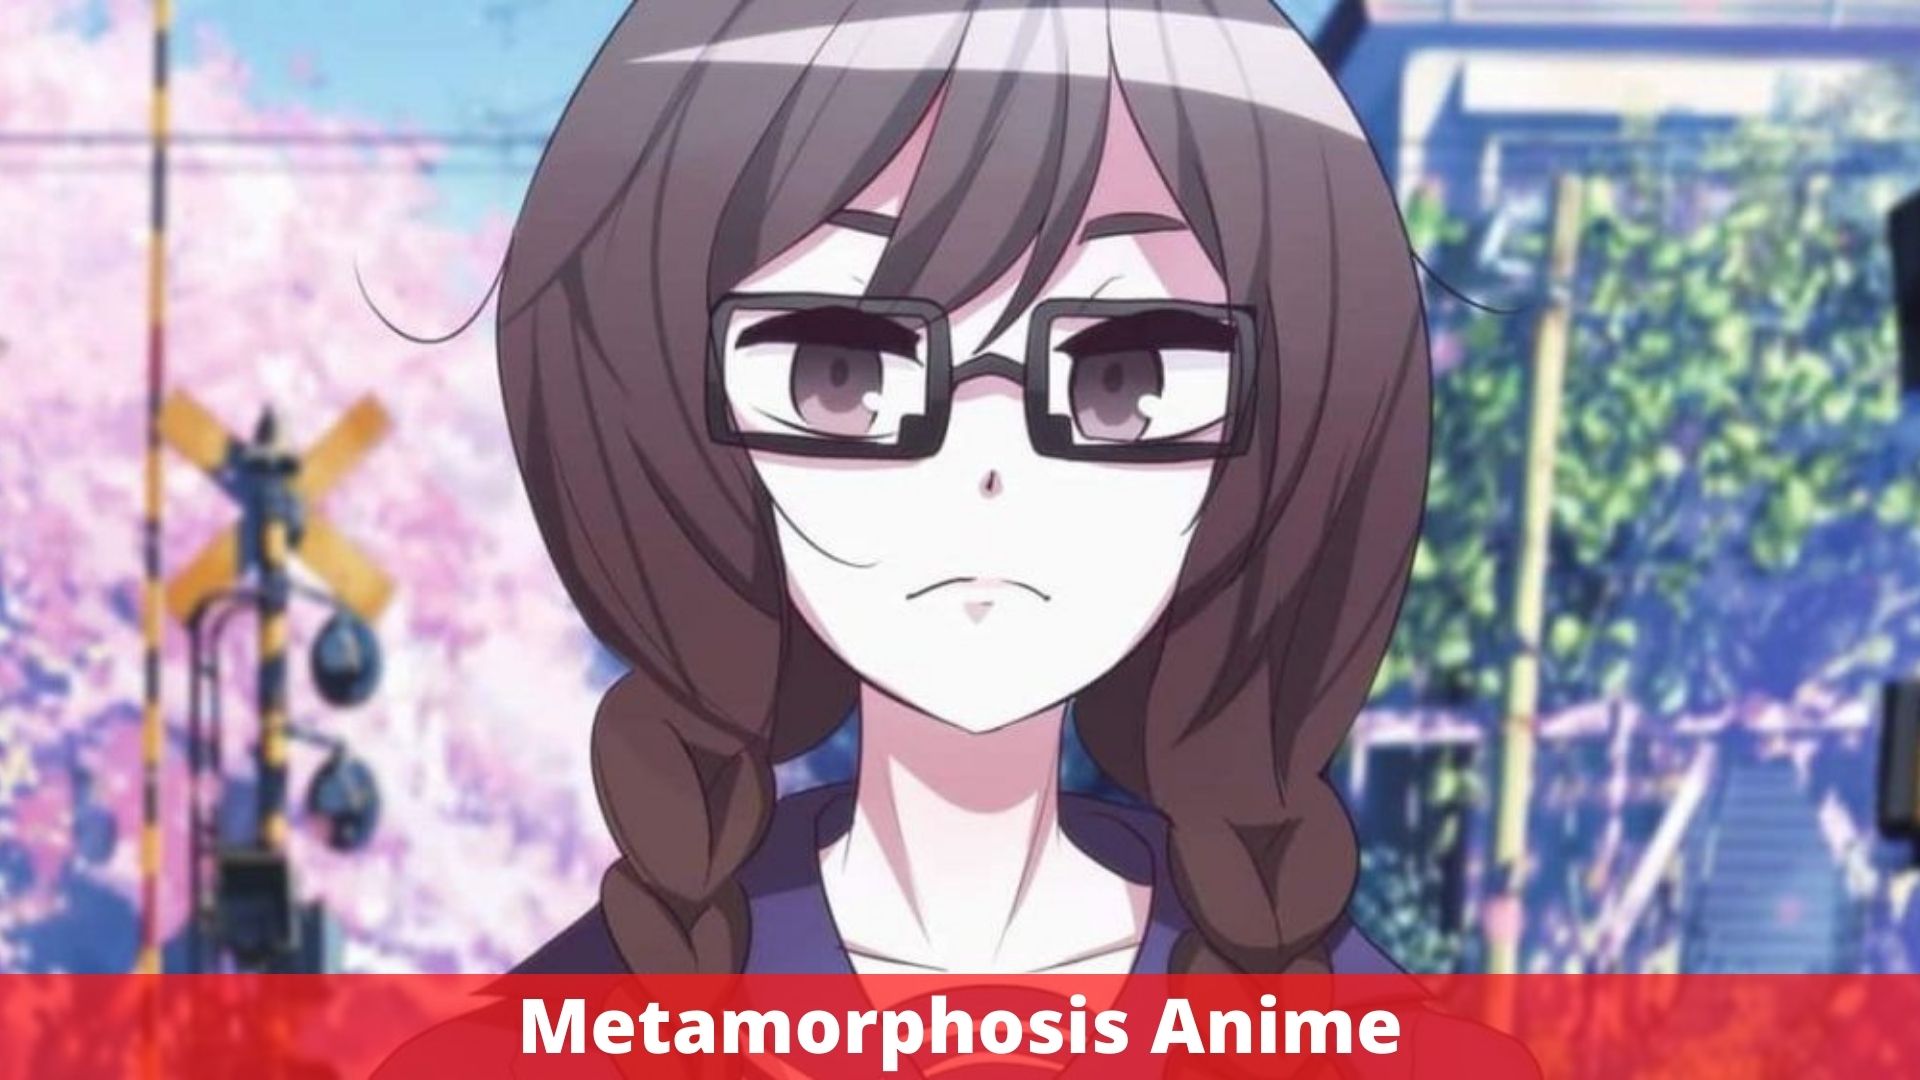 Metamorphosis Anime - Release Date, Plot, And More!